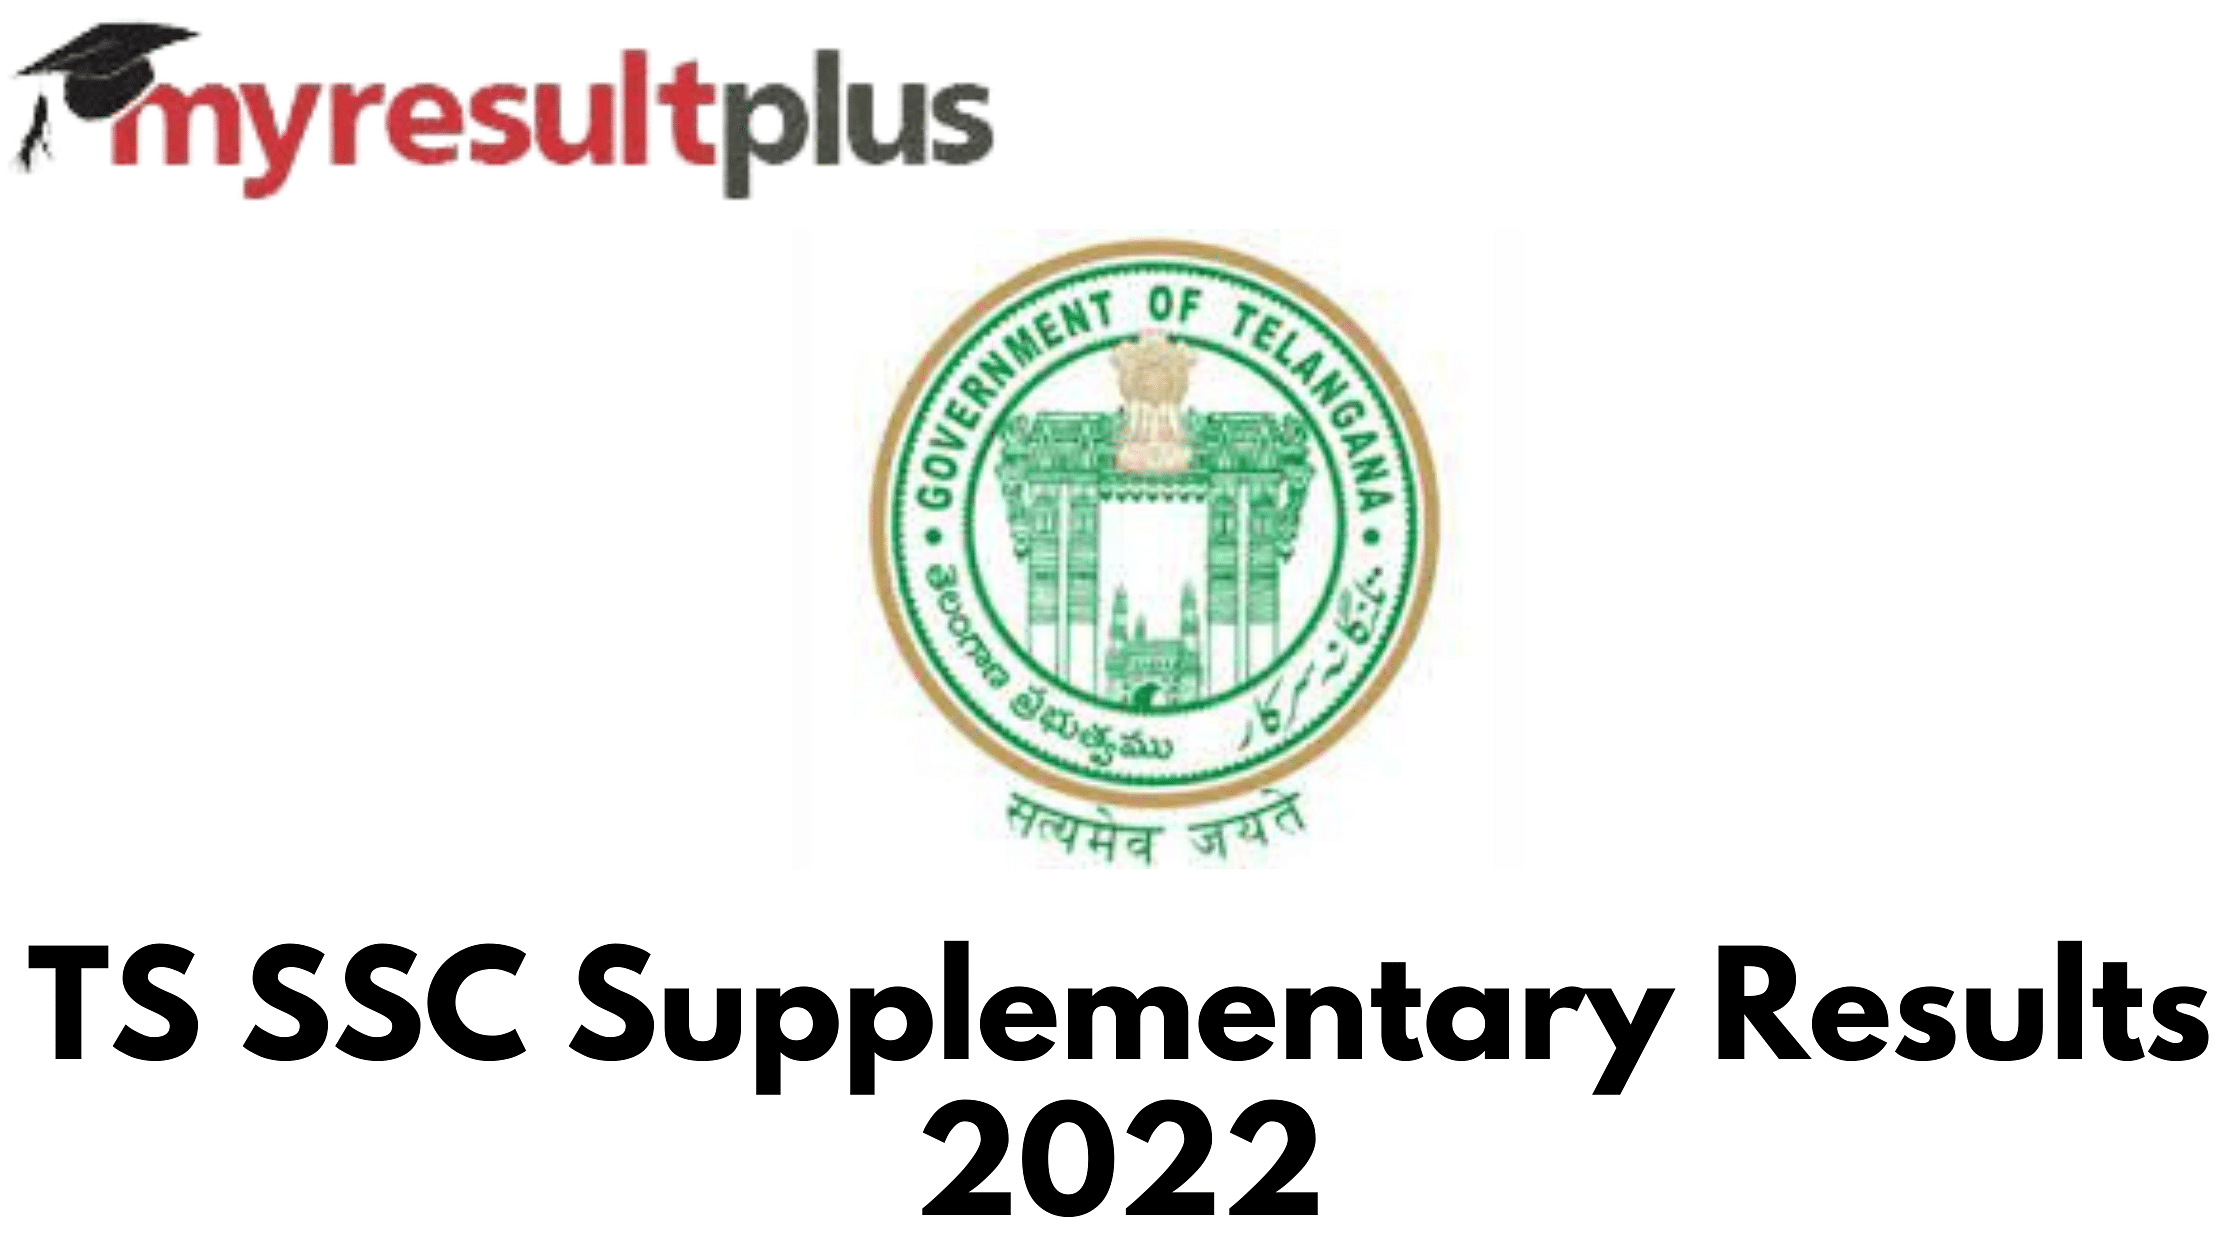 TS SSC Results 2022 For Supplementary Exams Out, Know How to Check Here